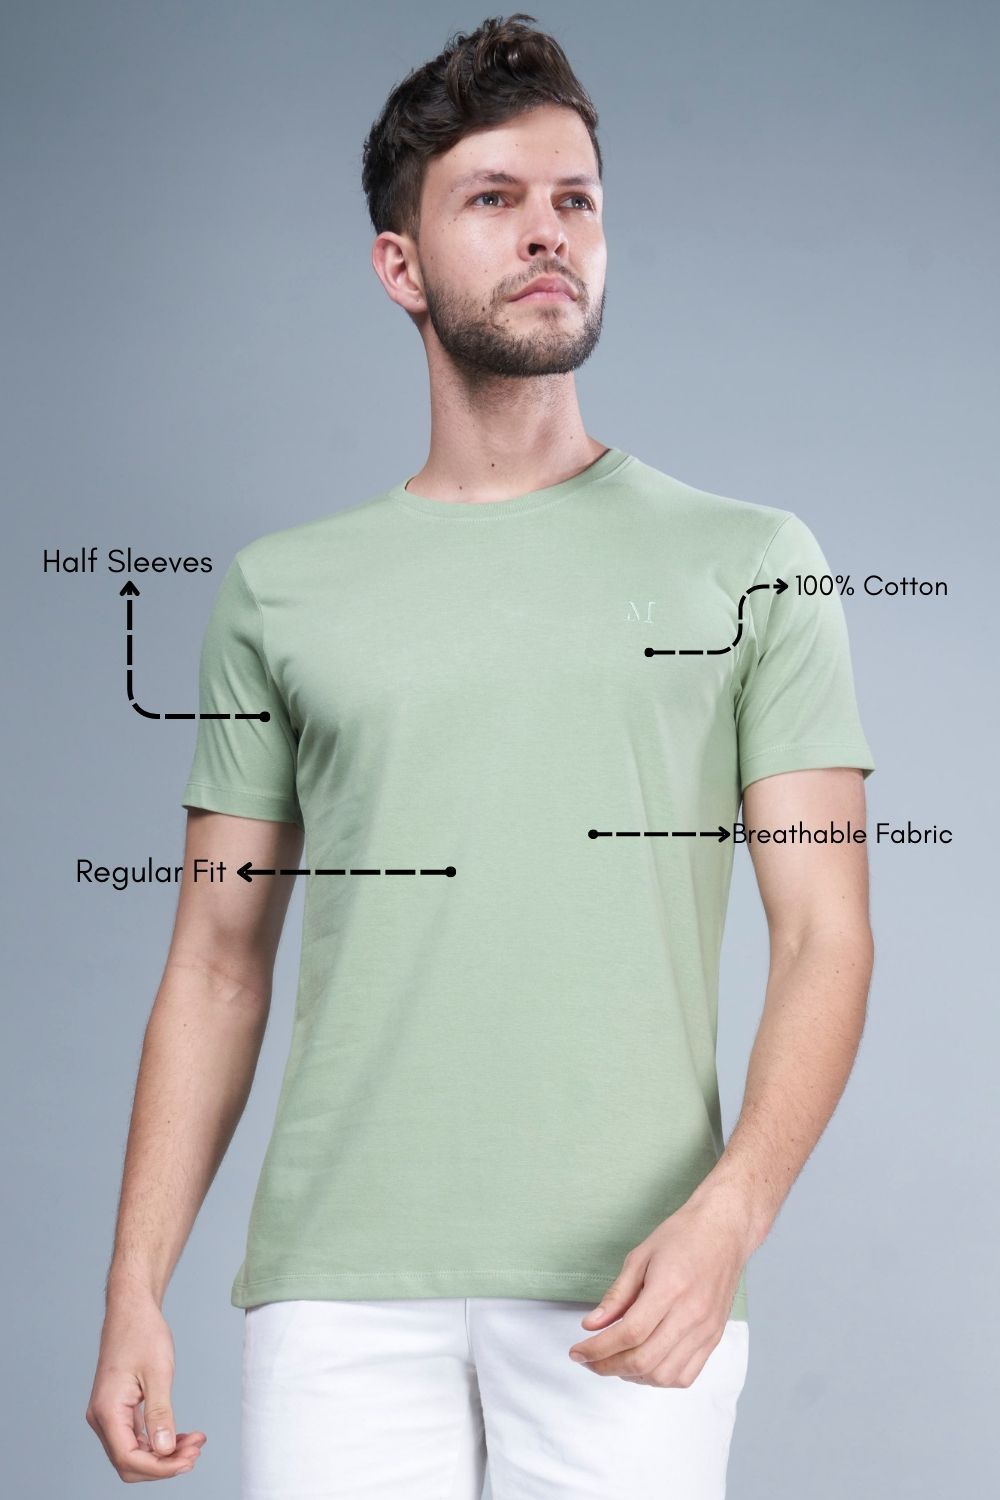 Green colored, cotton Graphic T shirt for men with half sleeves and round neck, product features.